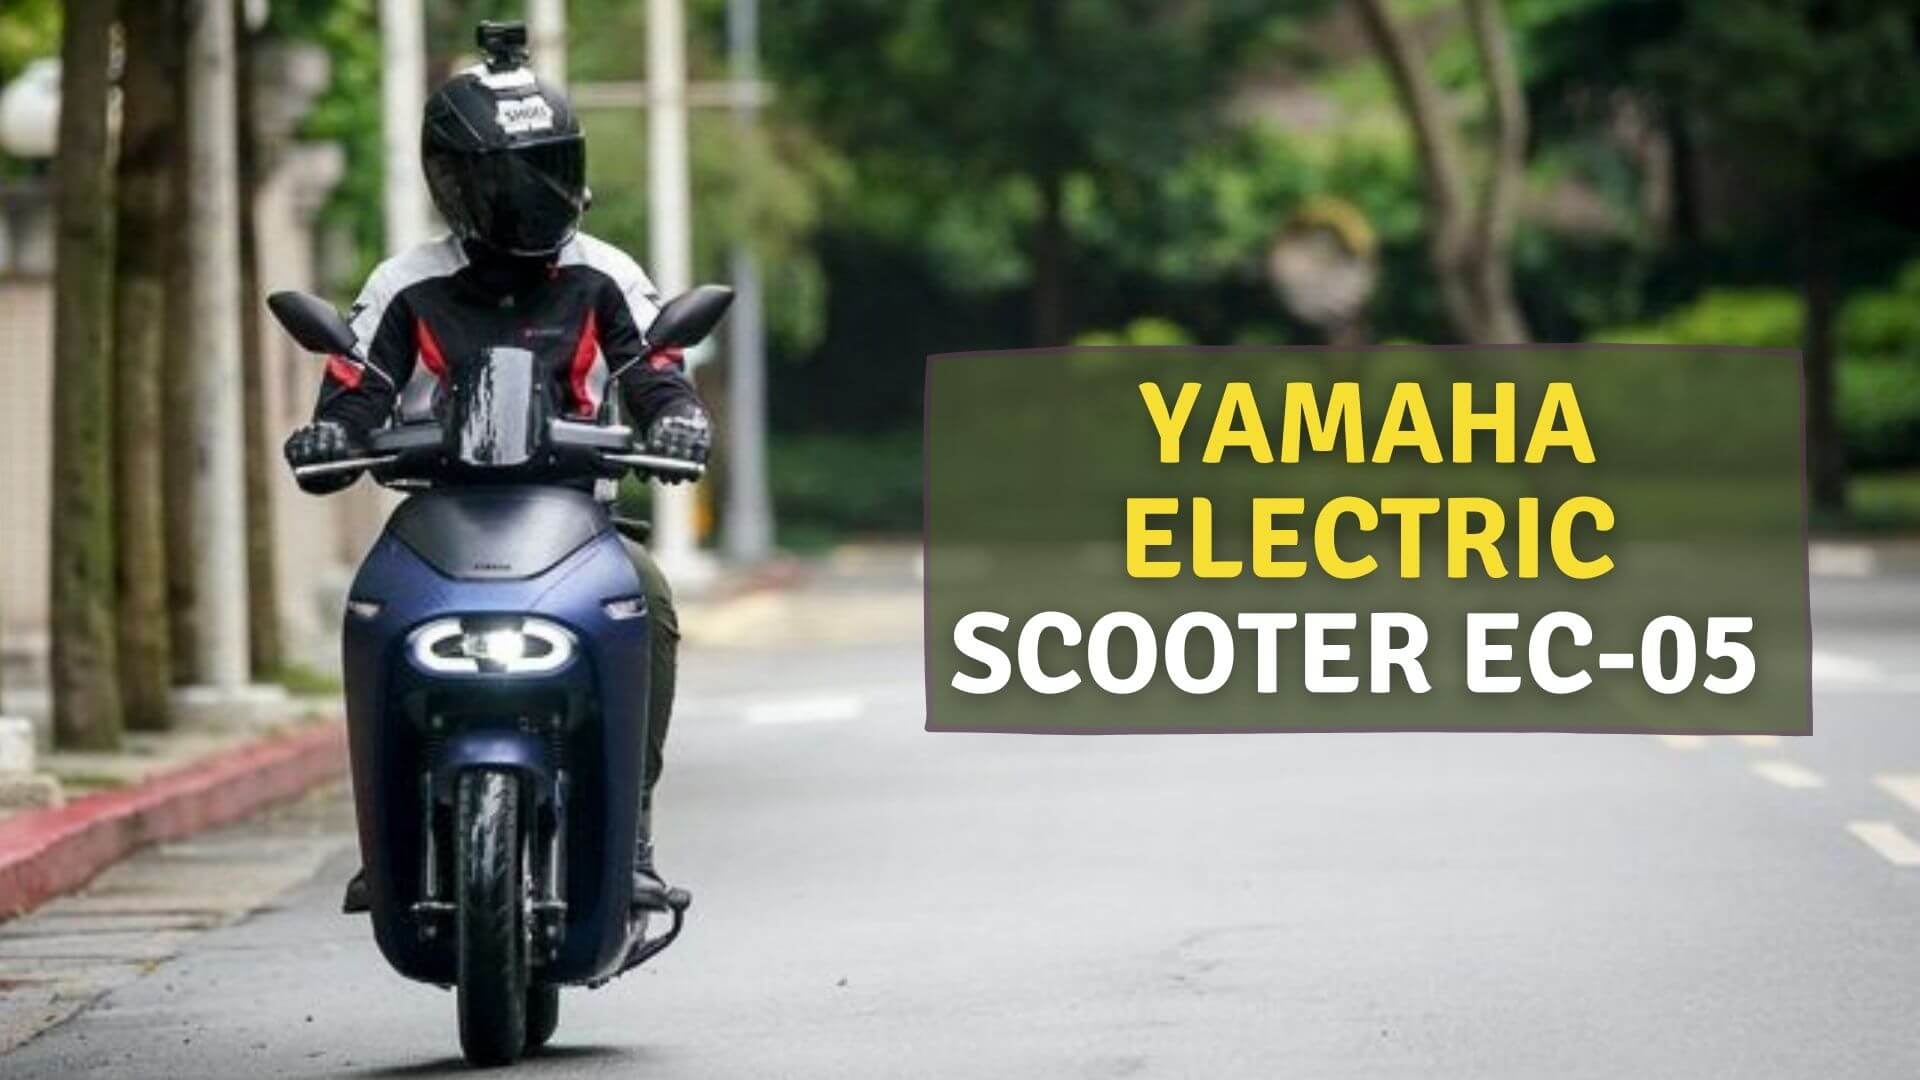 https://e-vehicleinfo.com/yamaha-ec-05-price-and-launch-in-india/